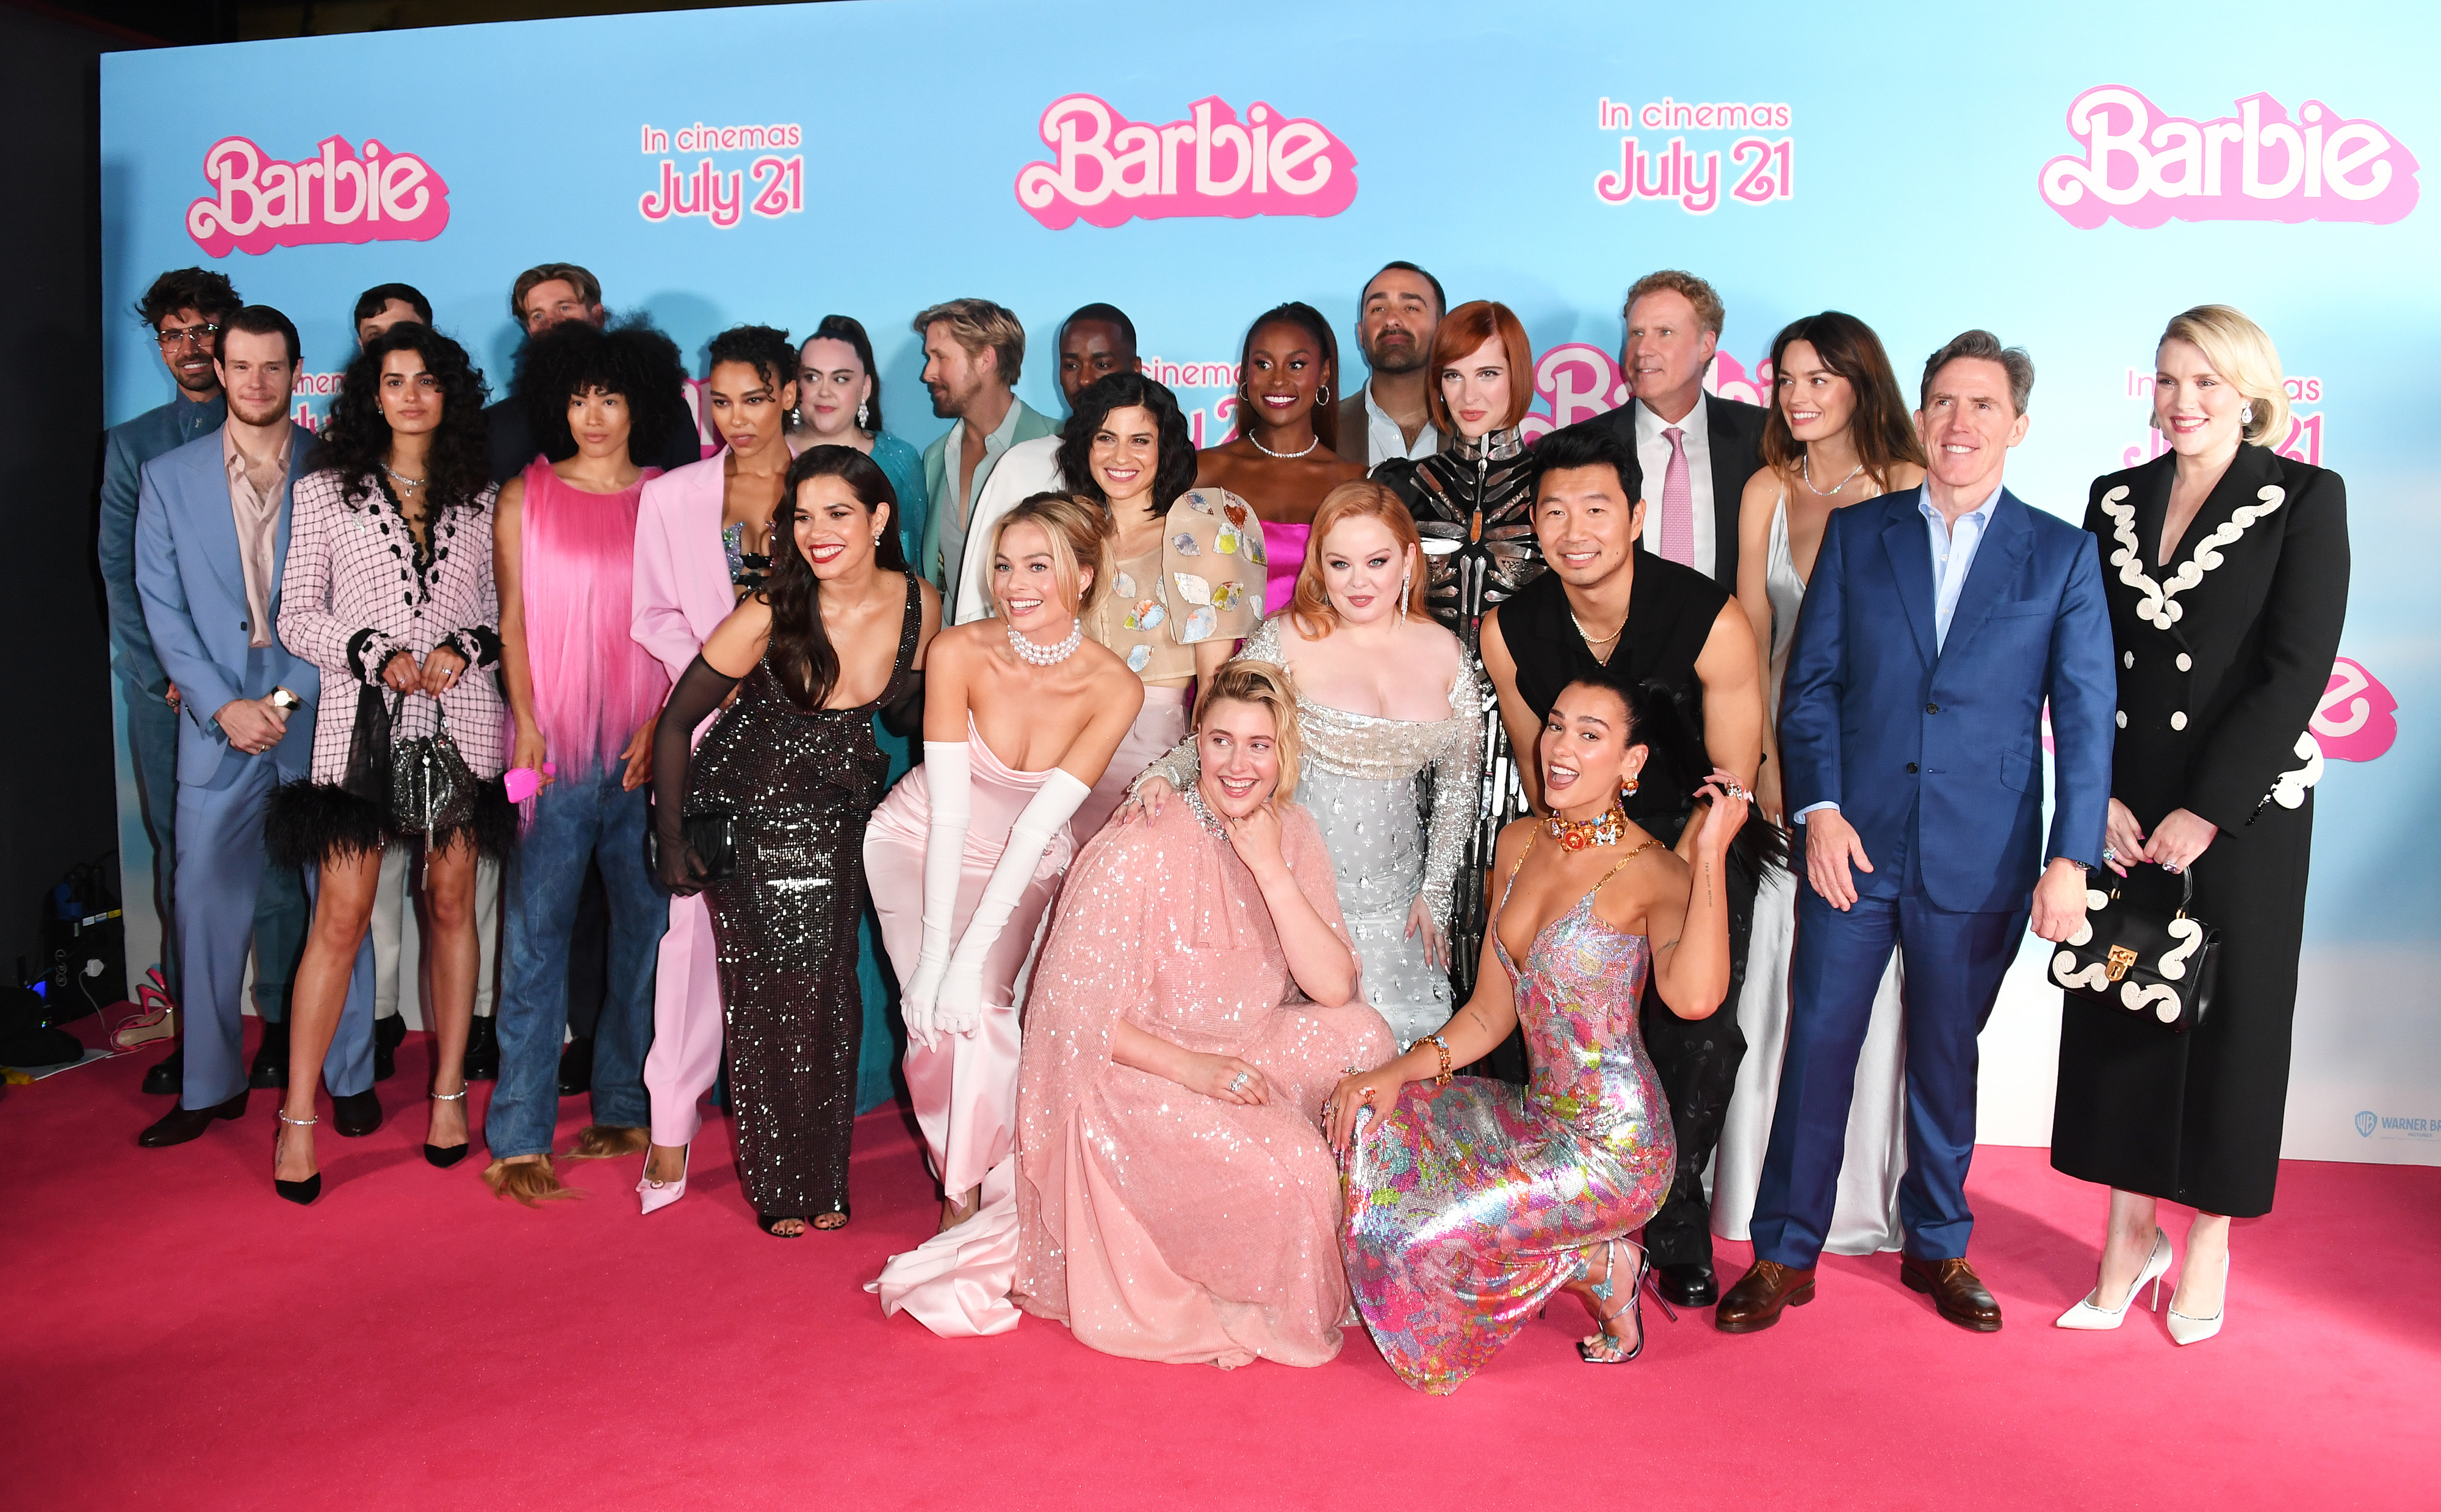 The cast posing on the pink carpet